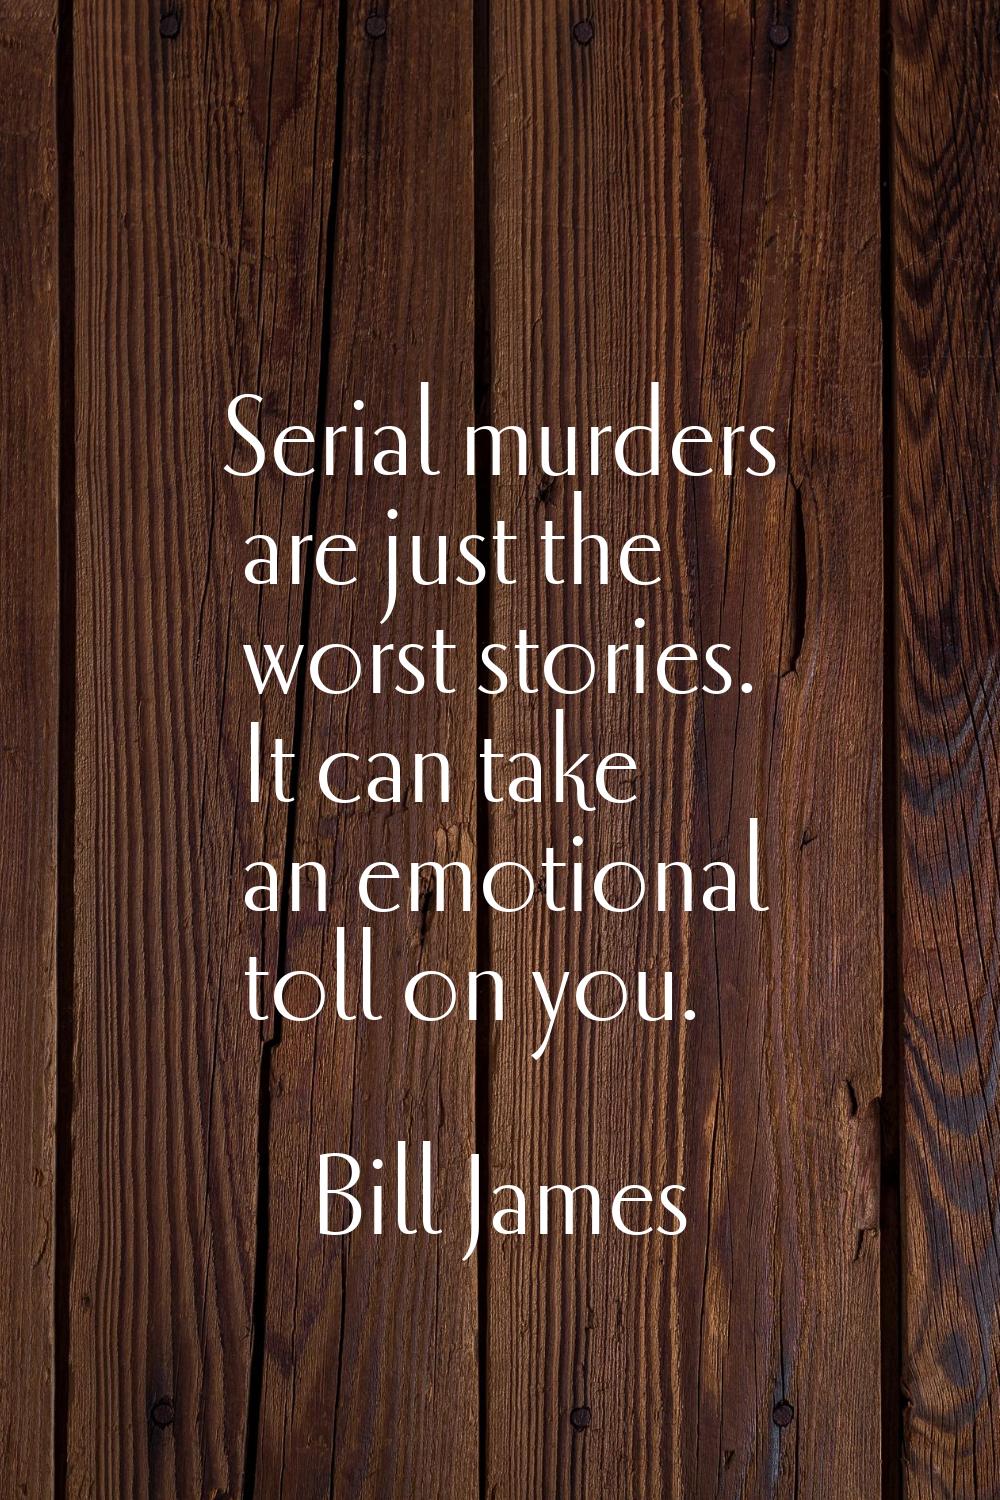 Serial murders are just the worst stories. It can take an emotional toll on you.